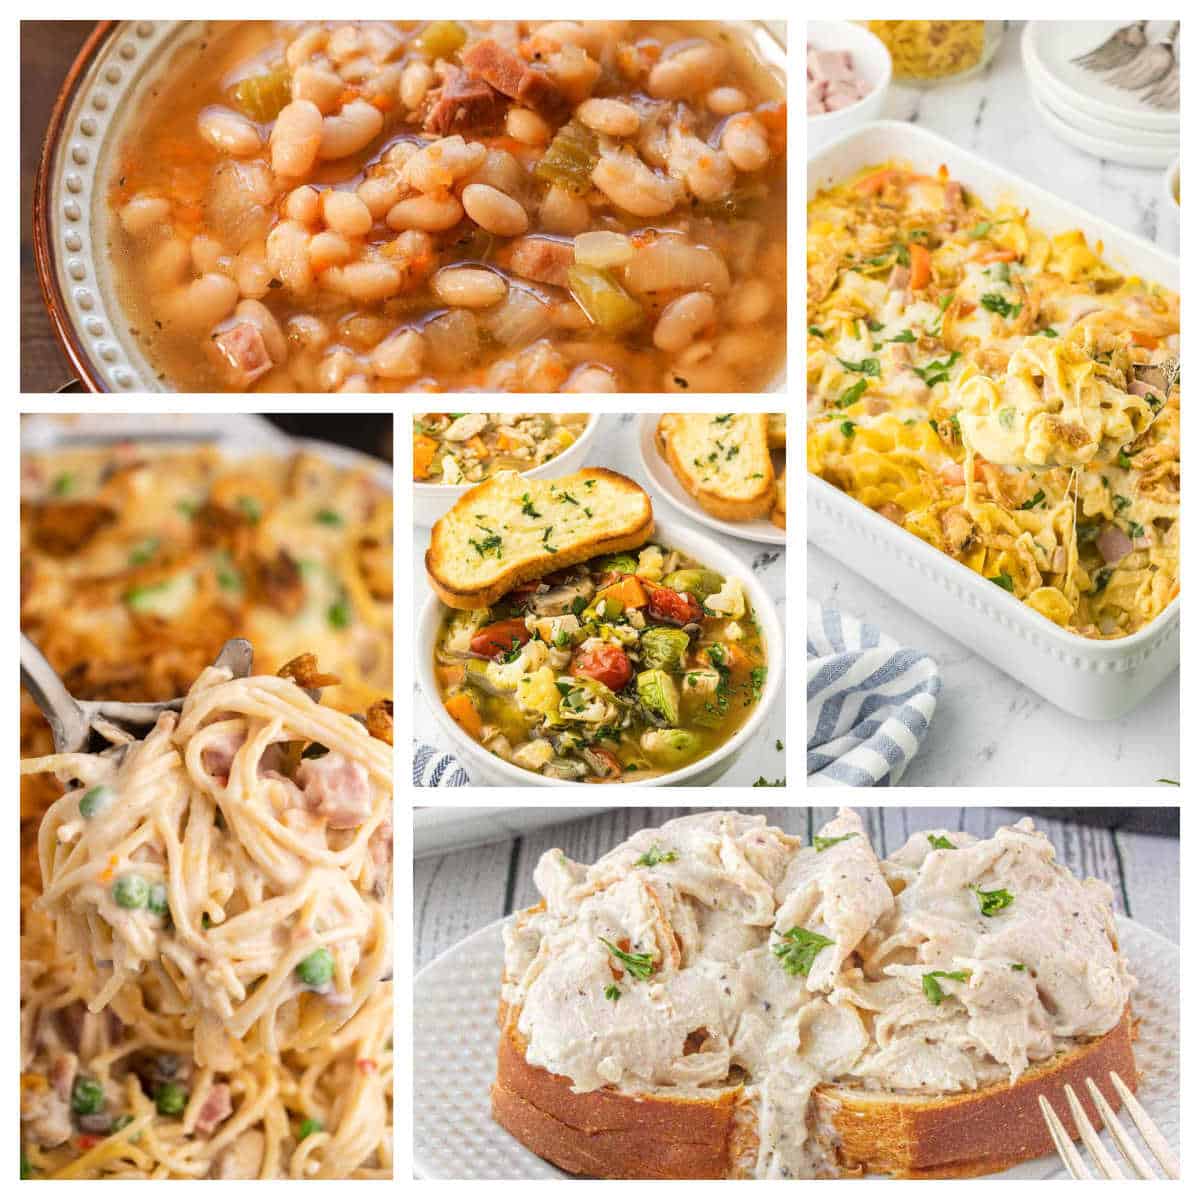 Recipes made with Turkey and Ham leftovers.